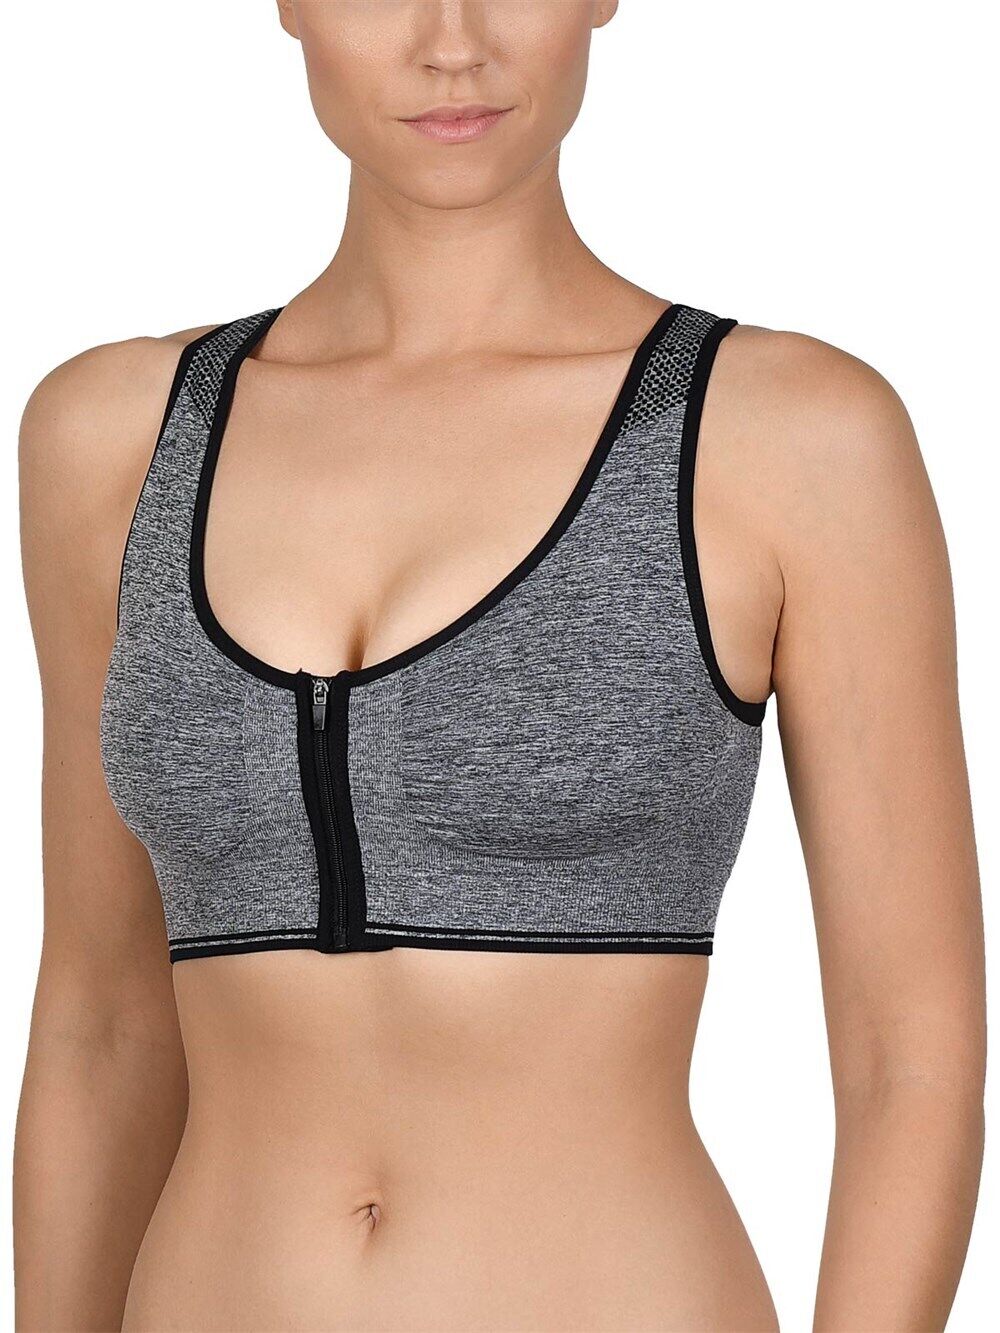 Zip Sports Bra Grey Removable Padded Non Wired Racer Back Sports Naturana Bra